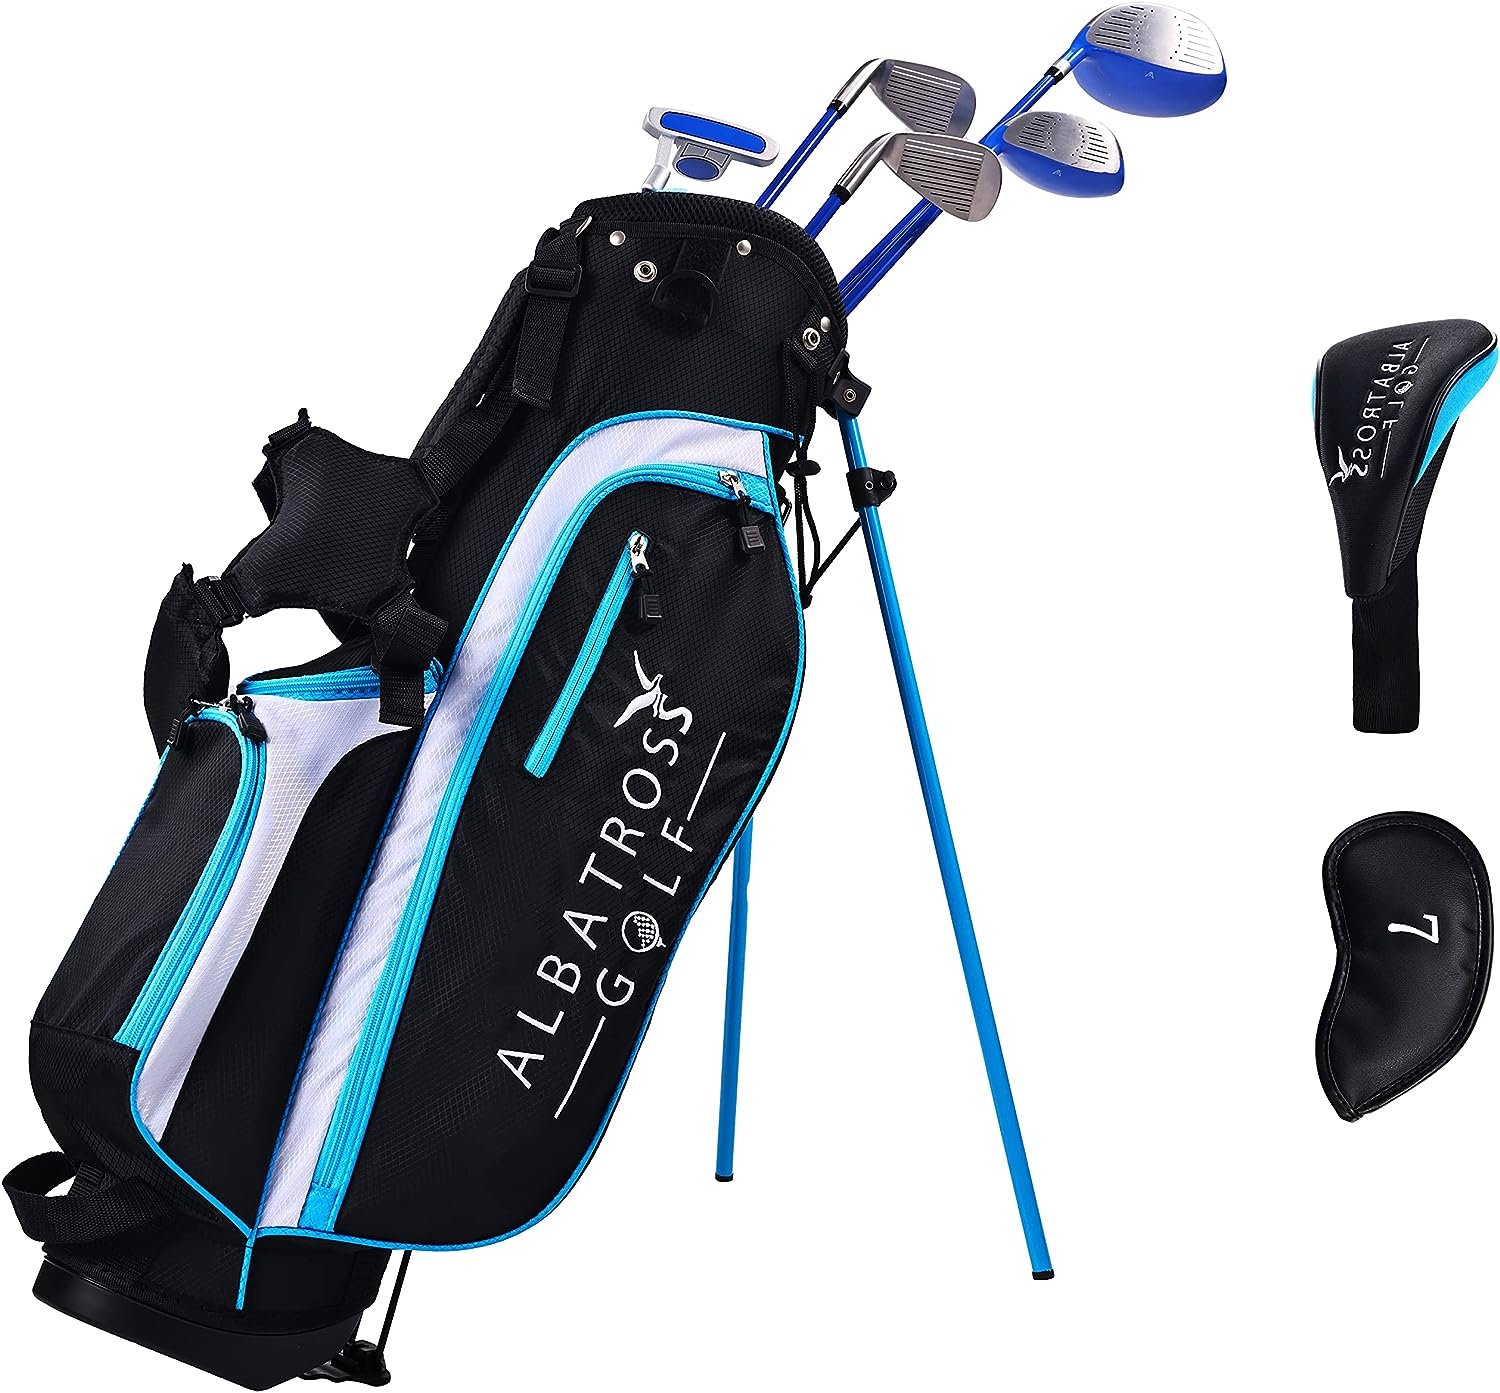 Albatross Golf Junior Complete Golf Club Set with Stand Bag for Children Kids Age 3-12, 7-Piece or 8-Piece Set, Right Hand